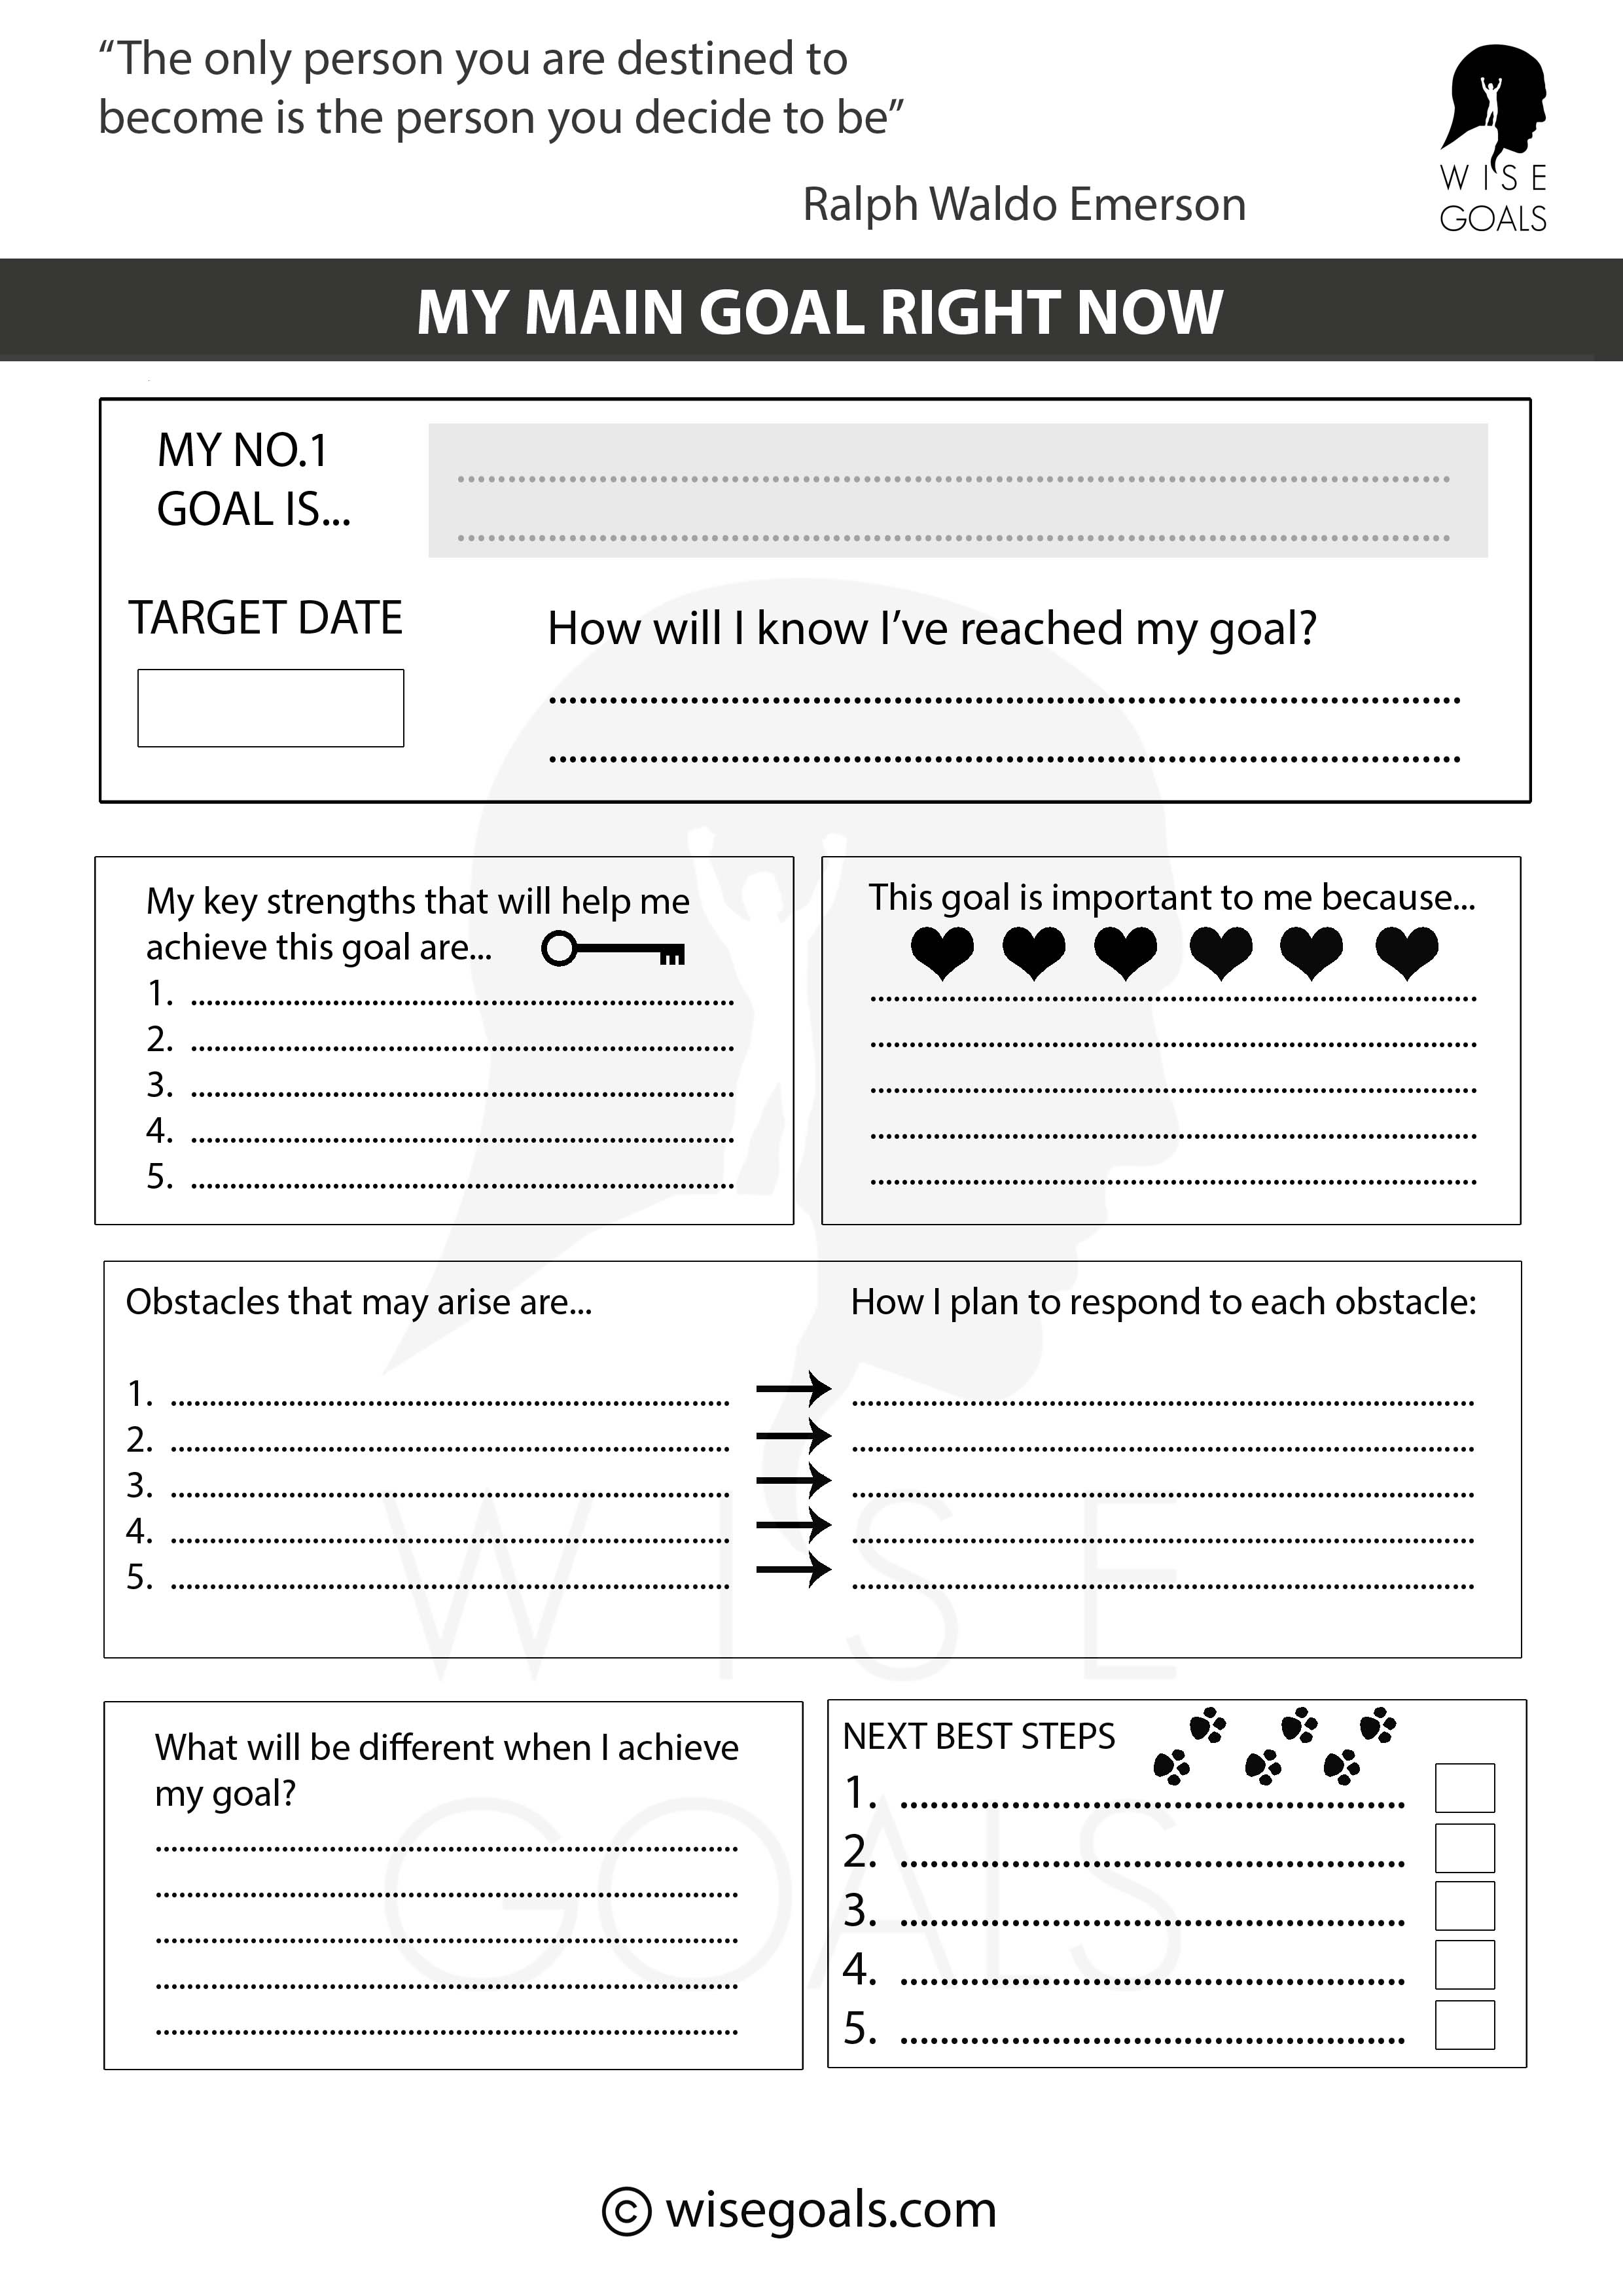 Goal setting worksheets for adults